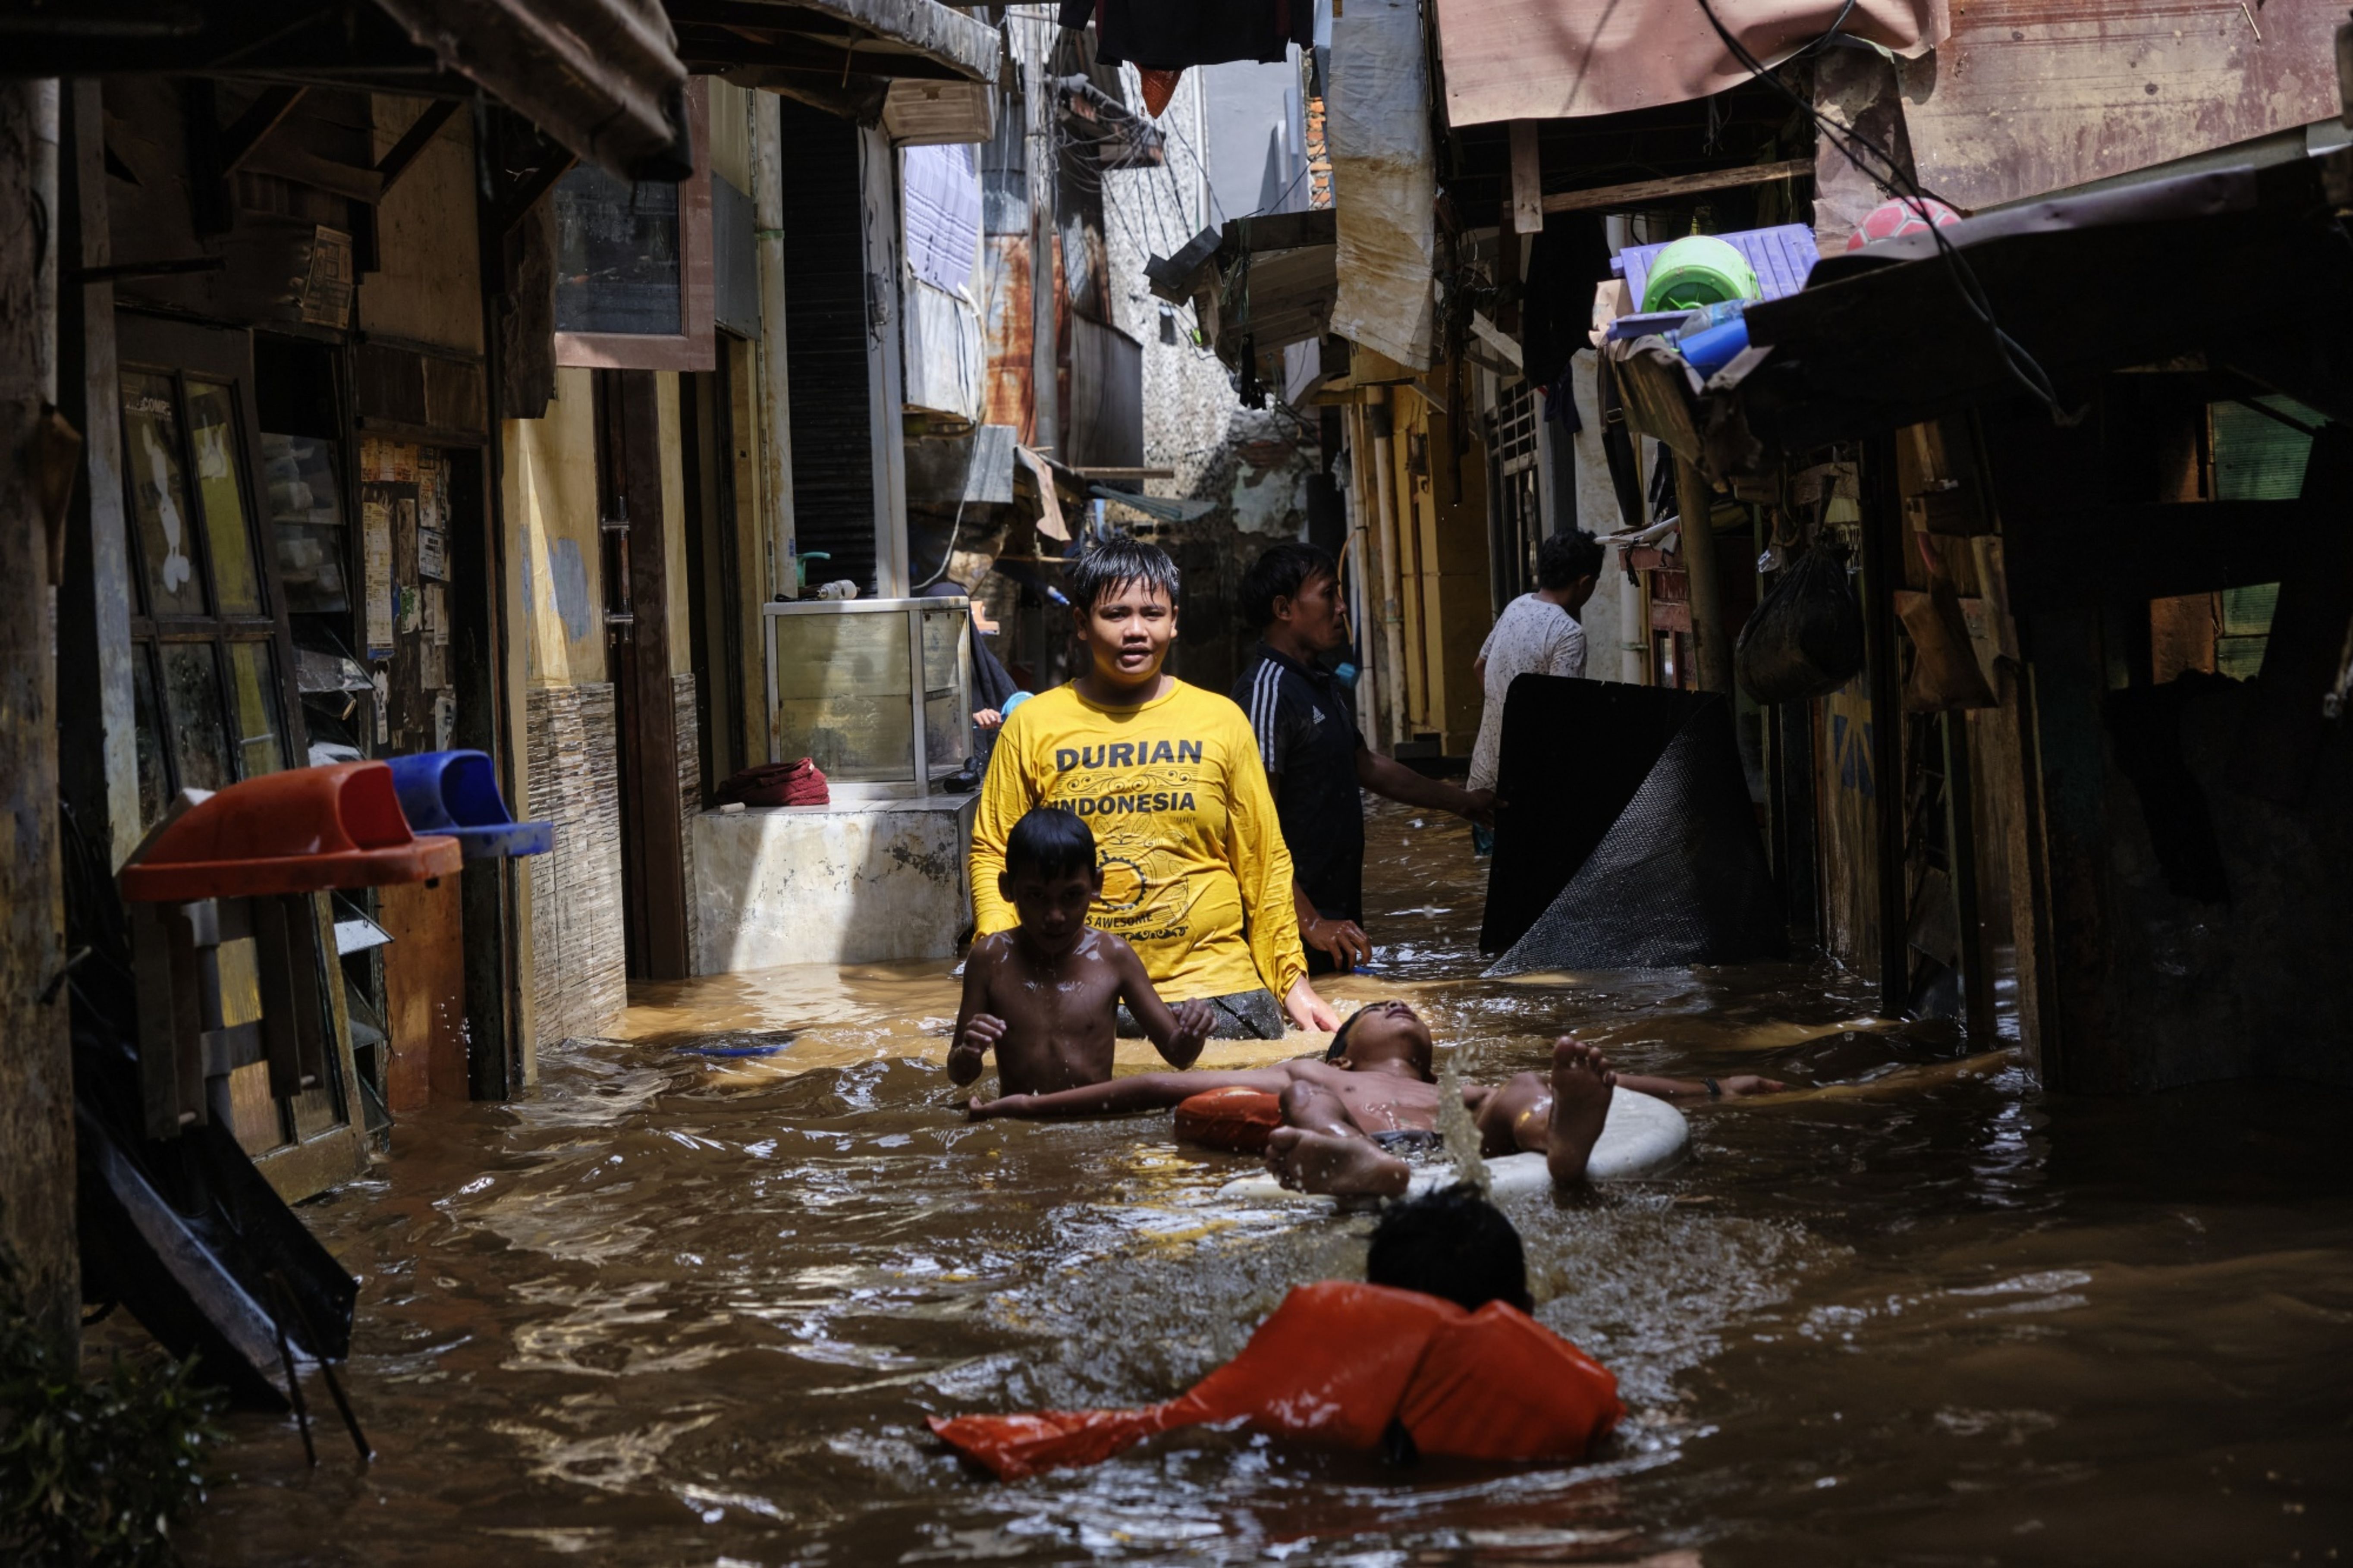 Indonesia Flooding Forces Evacuation of More Than 400,000 People with